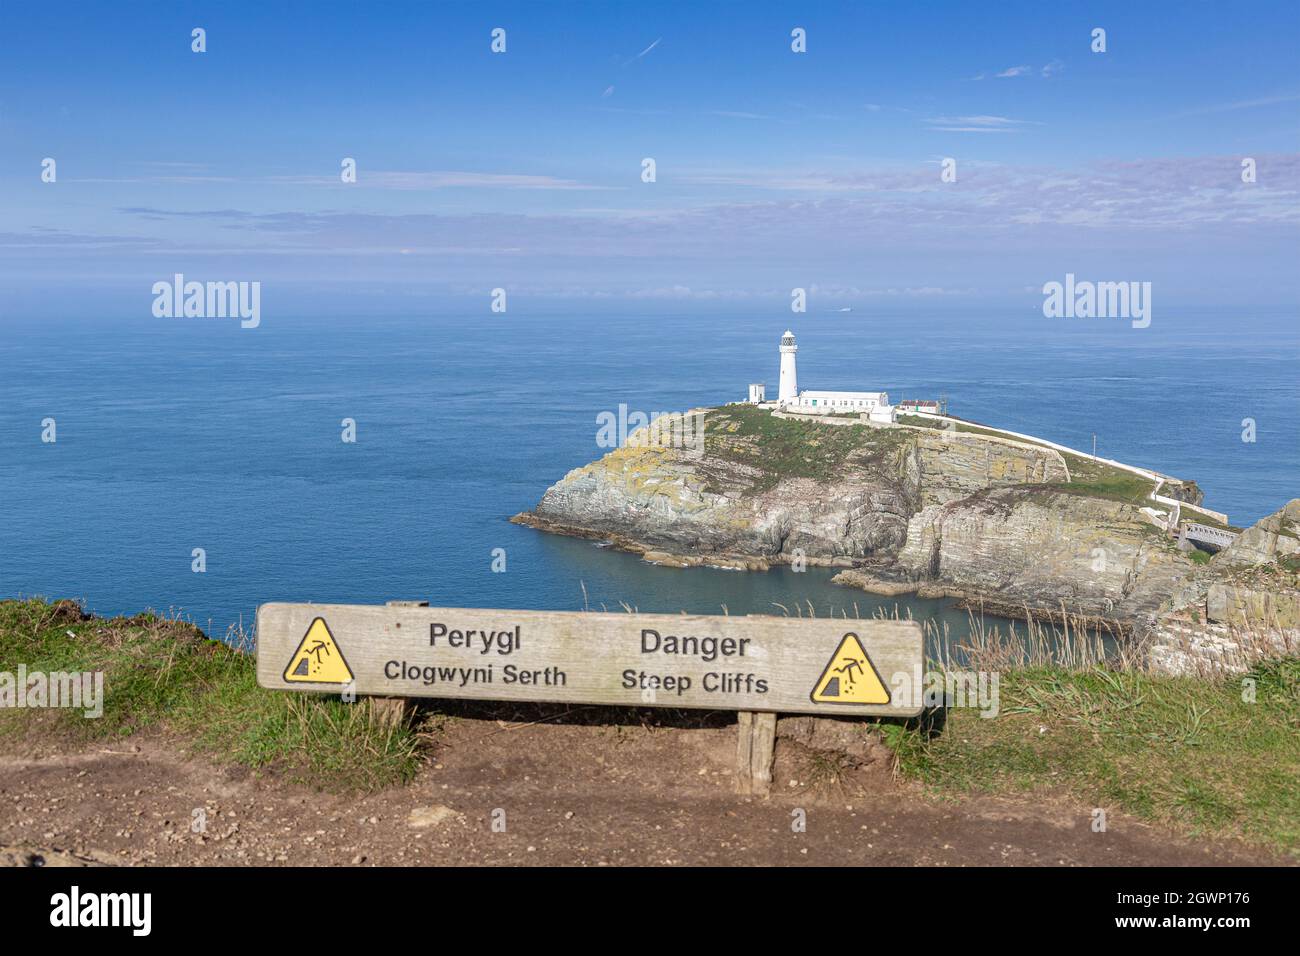 Holy Island, Wales: South Stack lighthouse (Ynys lawd) off the northwest coast of Anglesey. Warning sign on cliff edge. Stock Photo